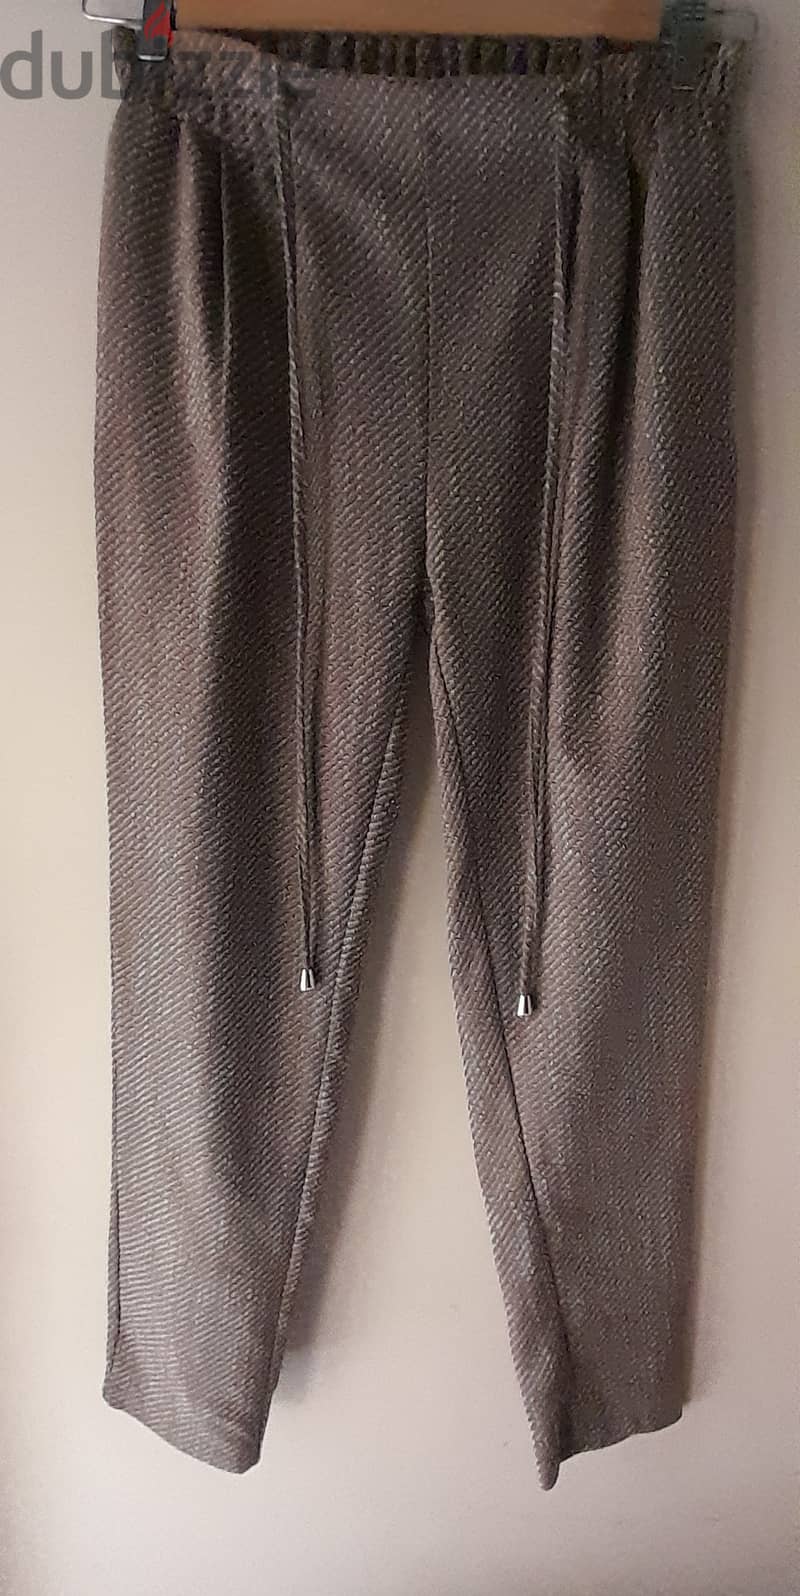 New soiree pants for women. Norway. 3